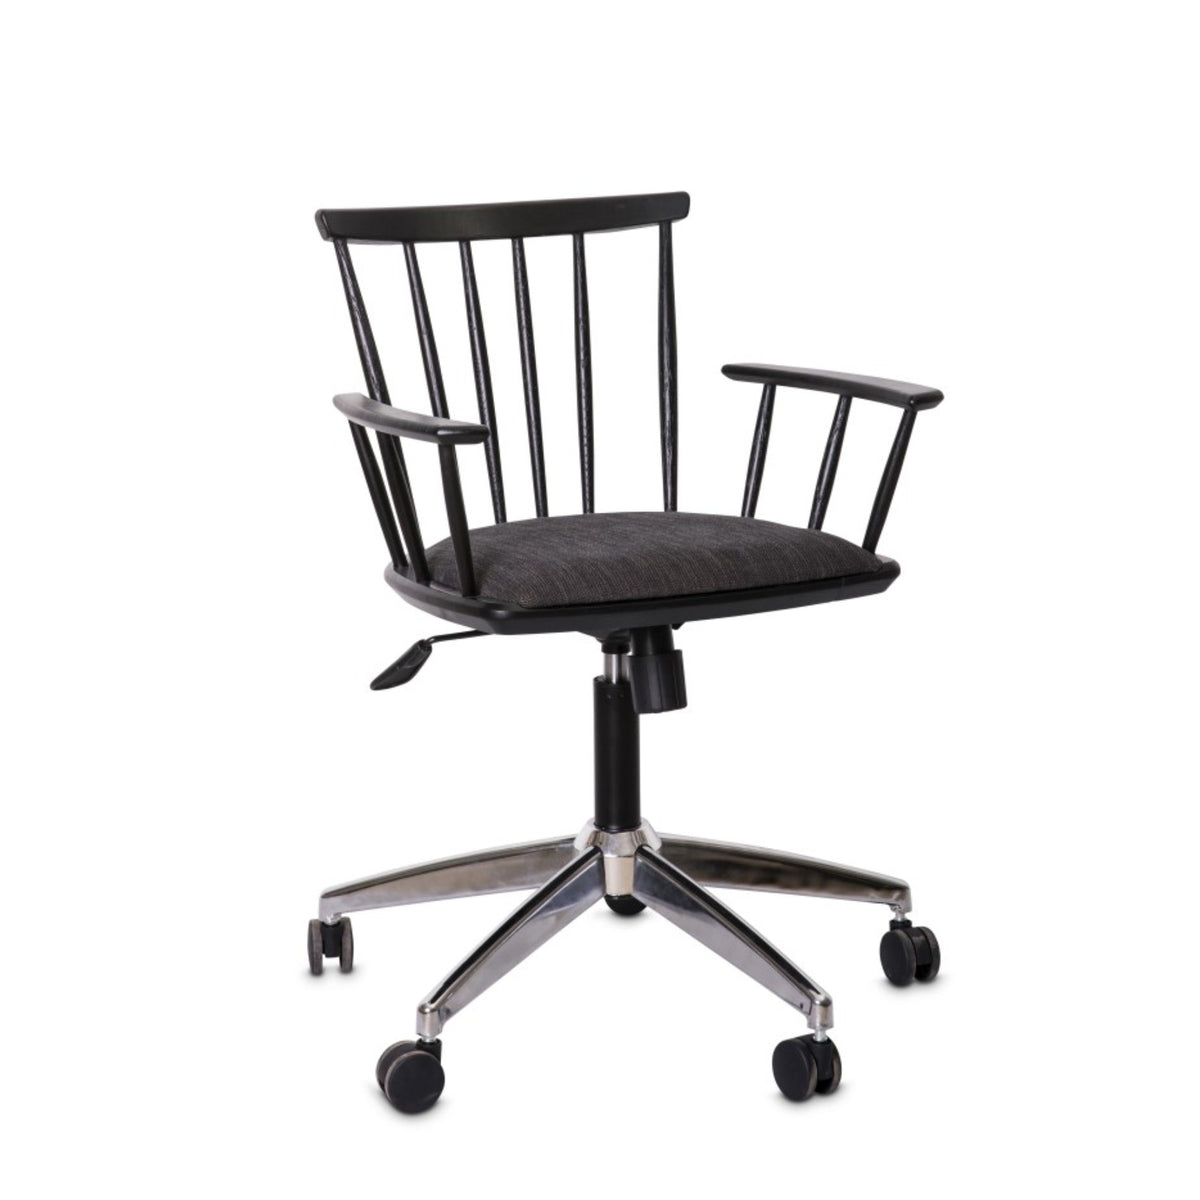 Carver Office Chair by Houtlander - Always Welcome Store